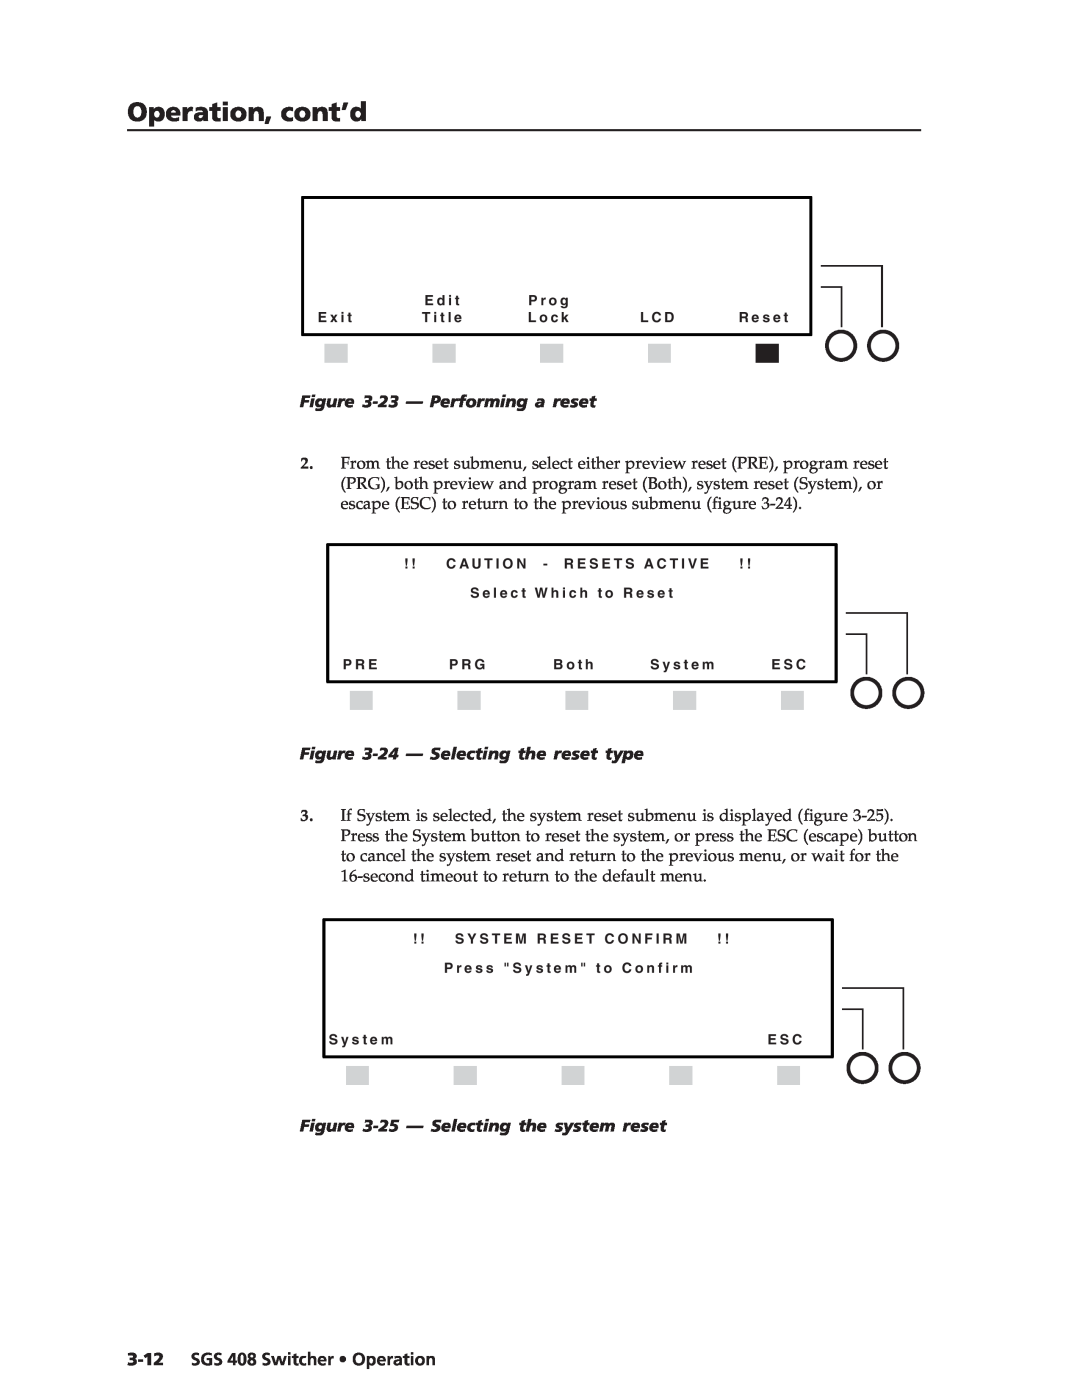 Extron electronic SGS 408 manual 23 - Performing a reset, 24 - Selecting the reset type, 25 - Selecting the system reset 